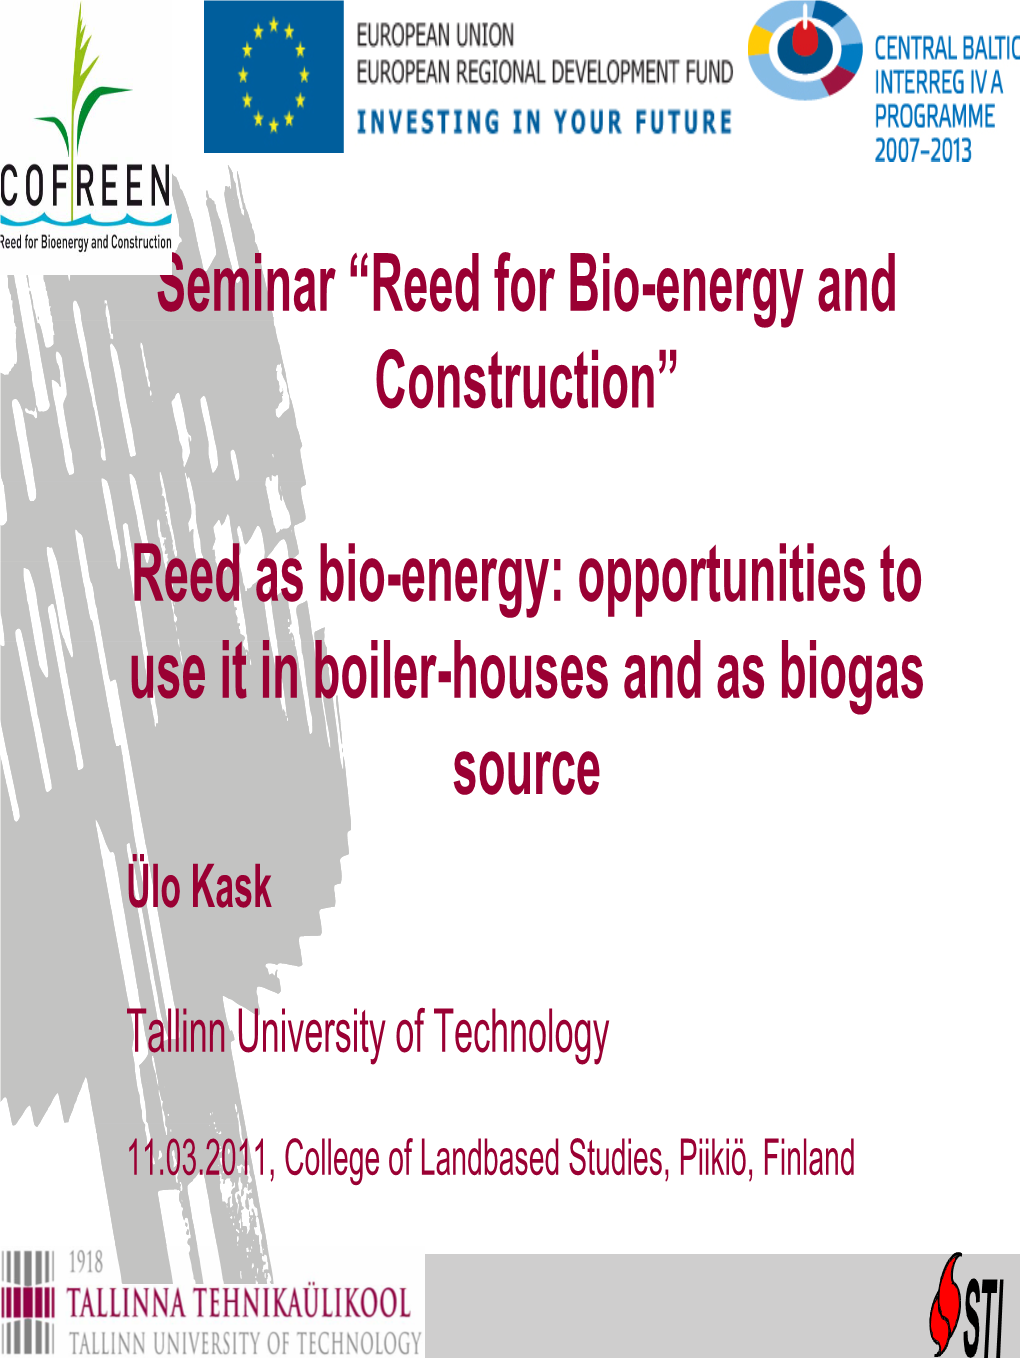 Seminar “Reed for Bio-Energy and Construction”